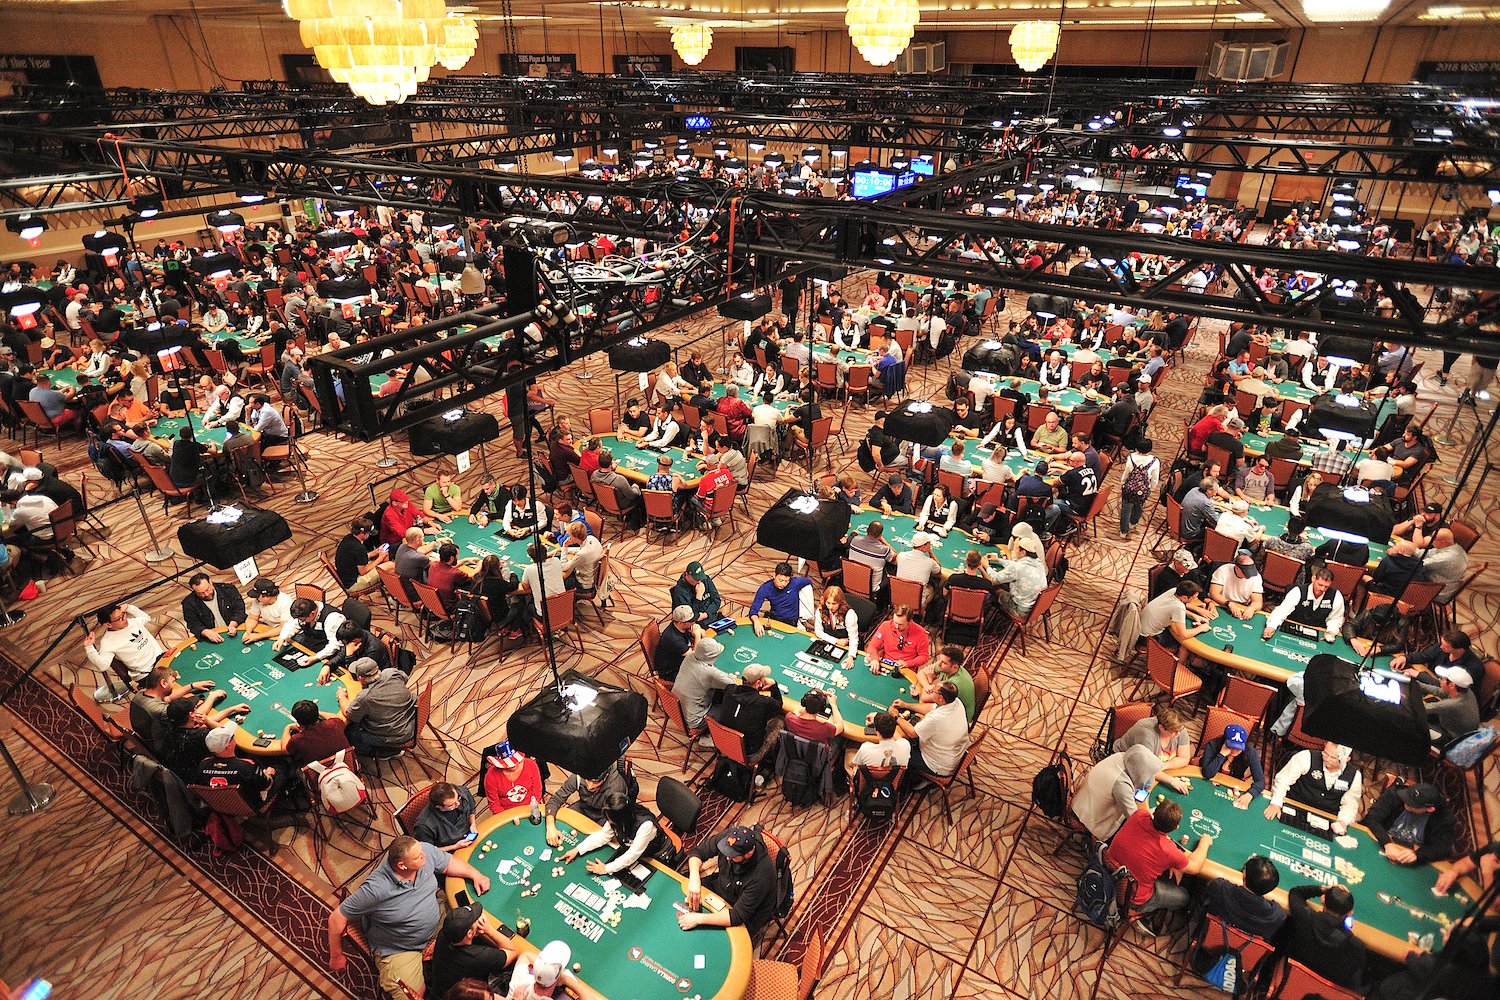 How to Make the 2021 World Series of Poker in Las Vegas Work (Op-Ed)